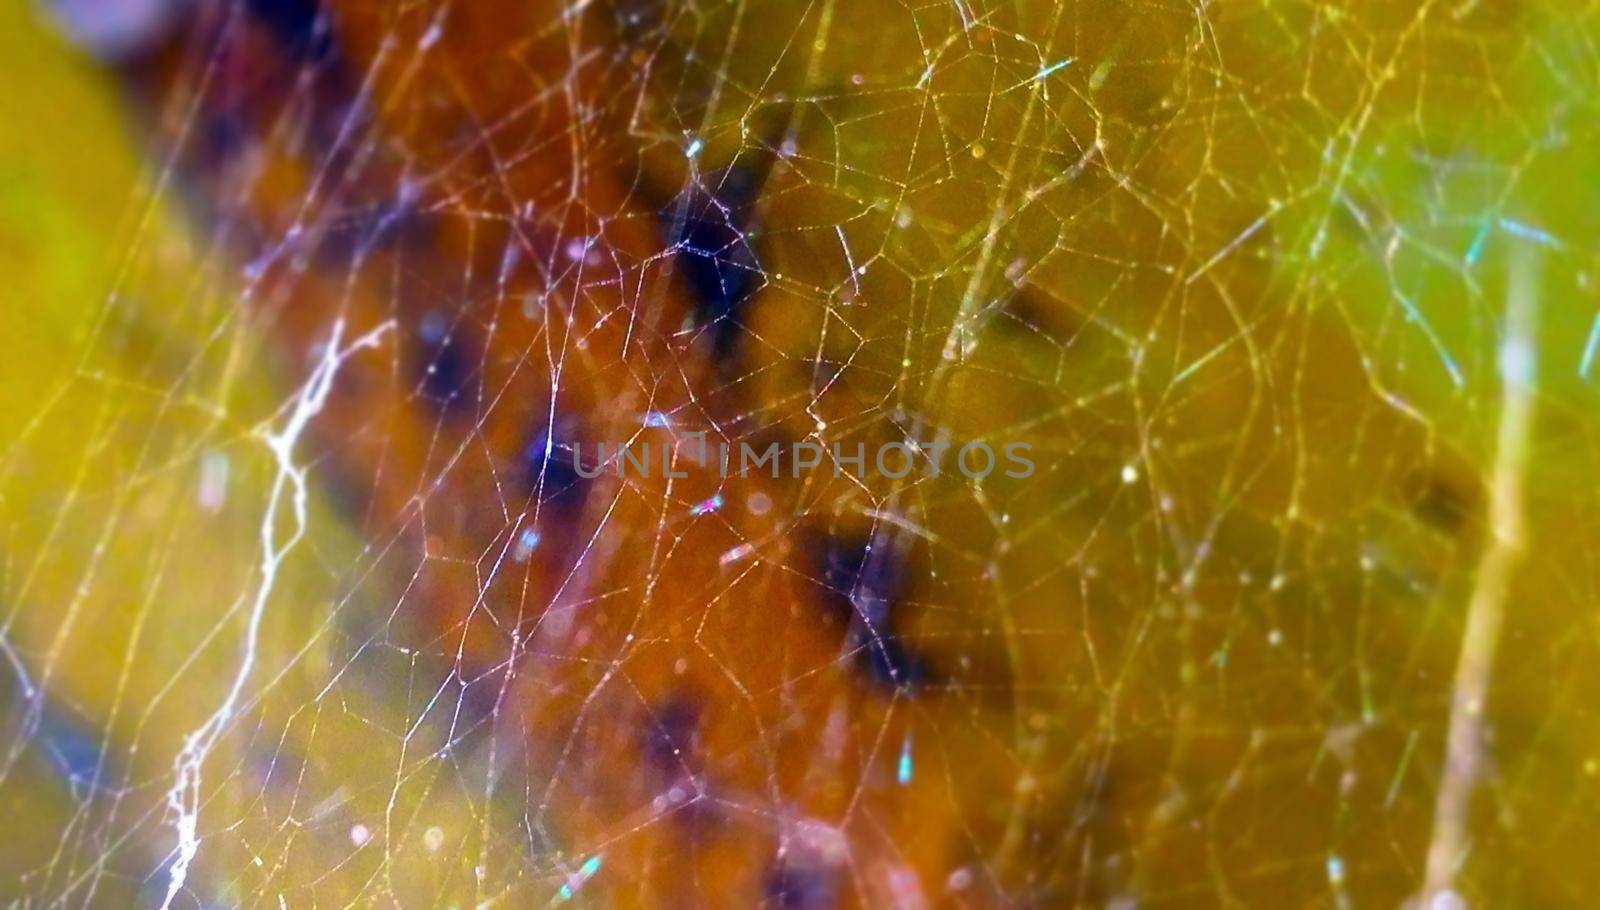 A photo of a spider's web in the morning. Focus is on the web and water drops